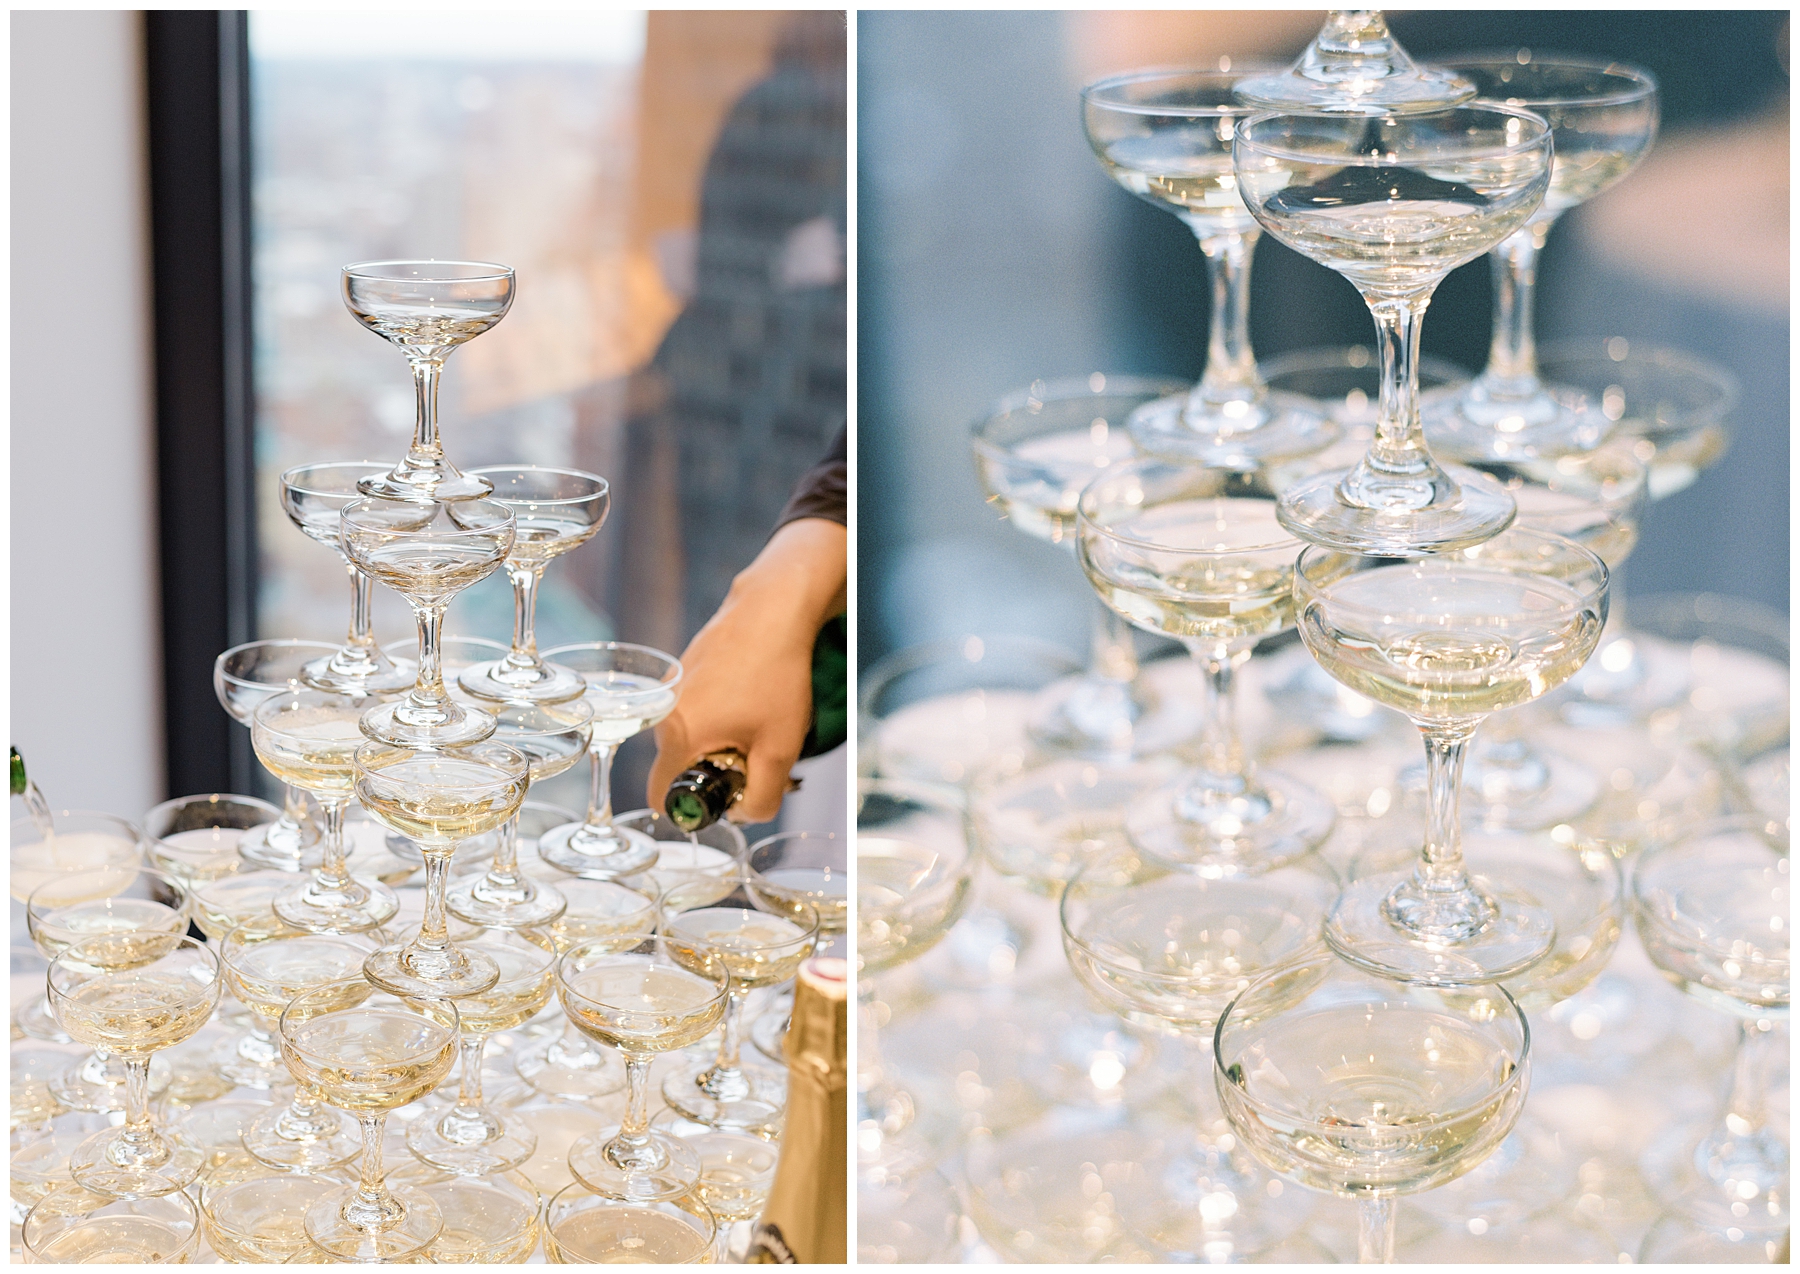 champagne tower at wedding reception